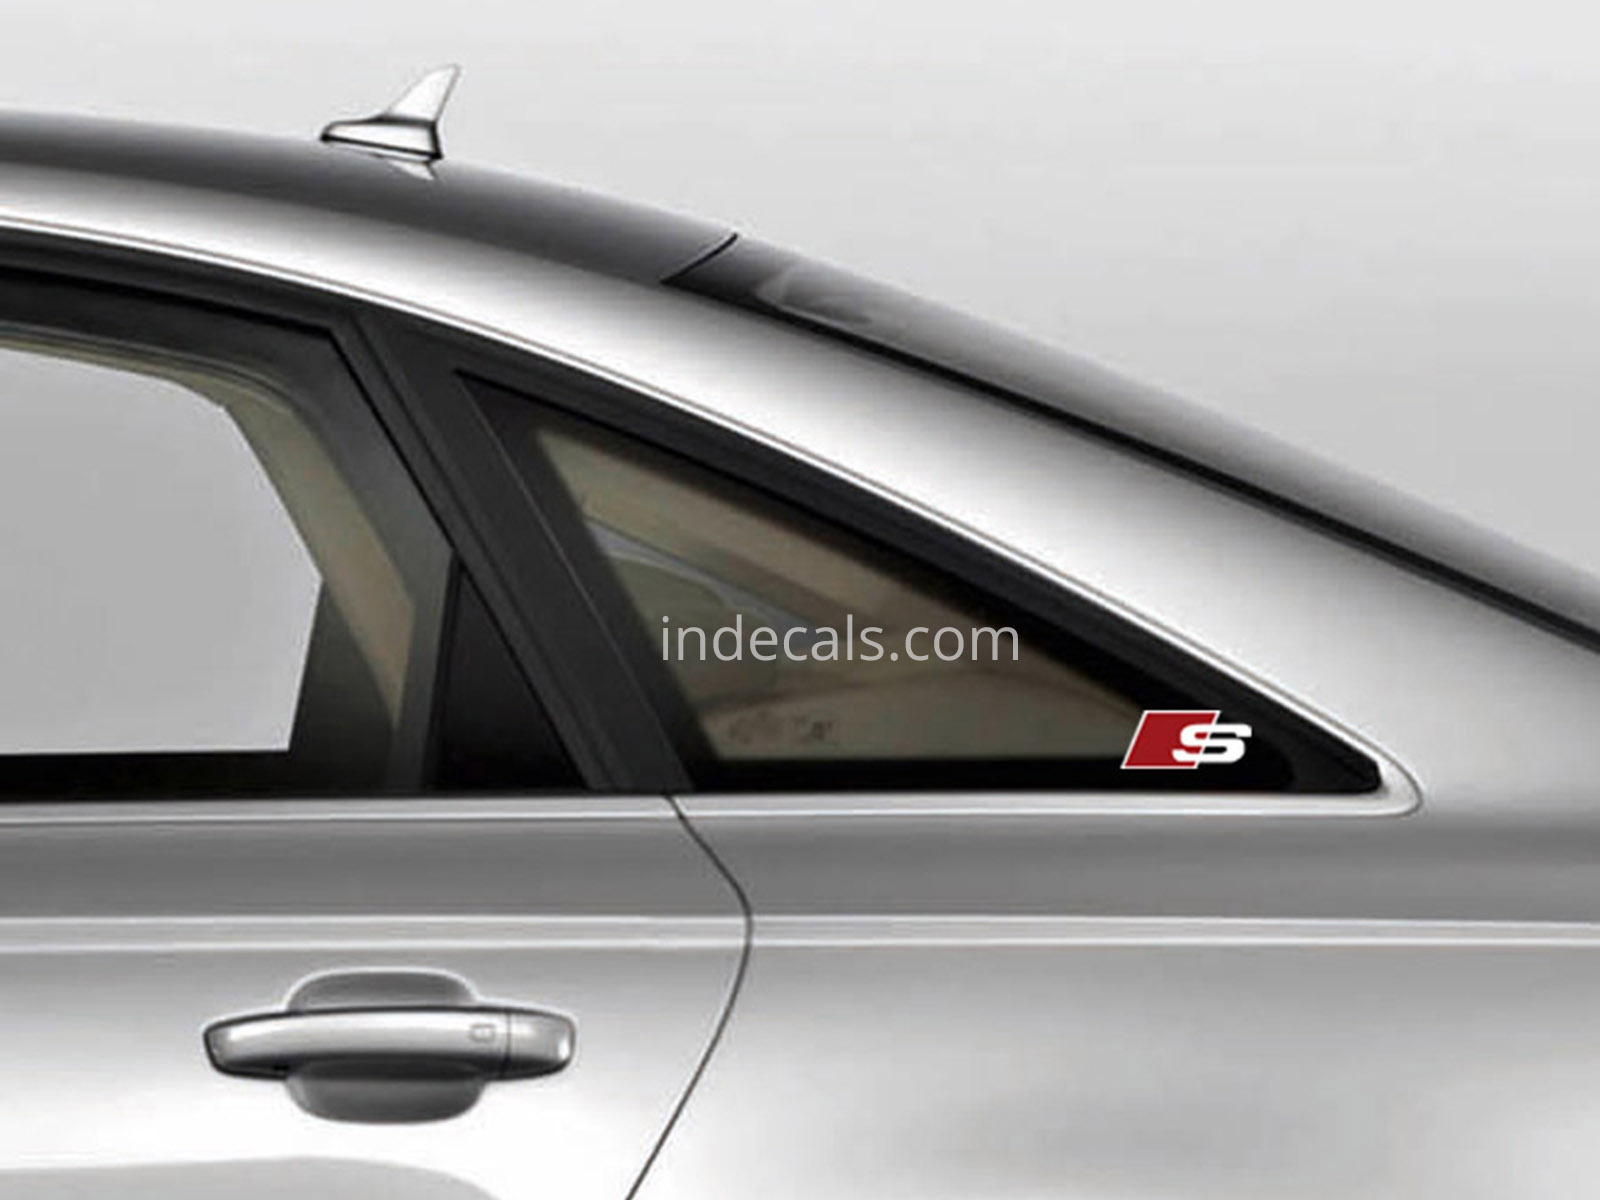 2 x Audi S-Line Stickers for Rear Small Window - White + Red